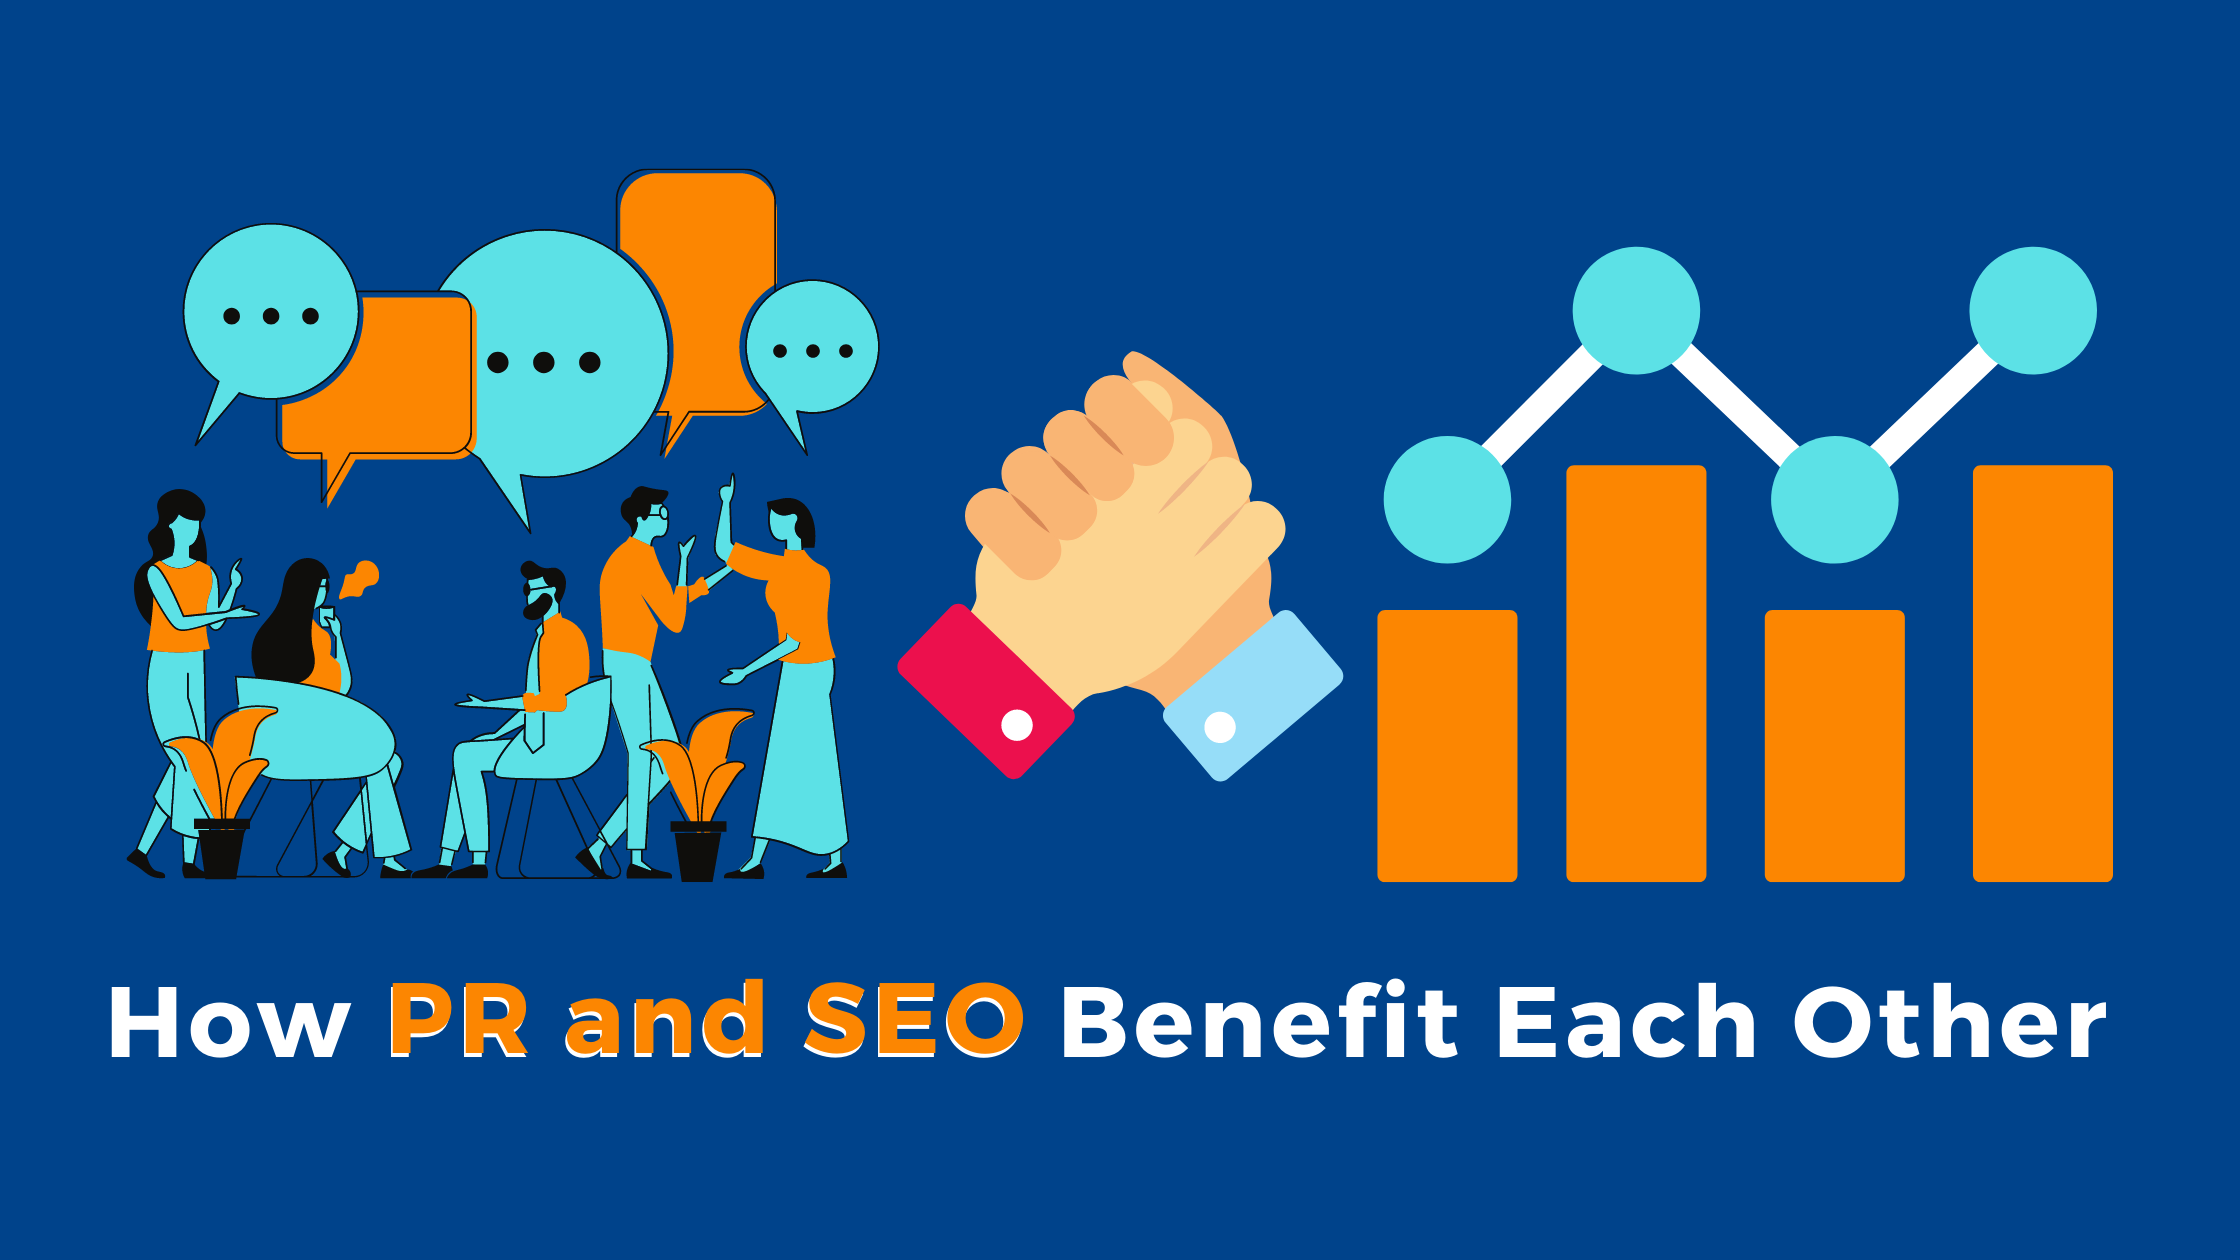 How PR and SEO Benefit Each Other